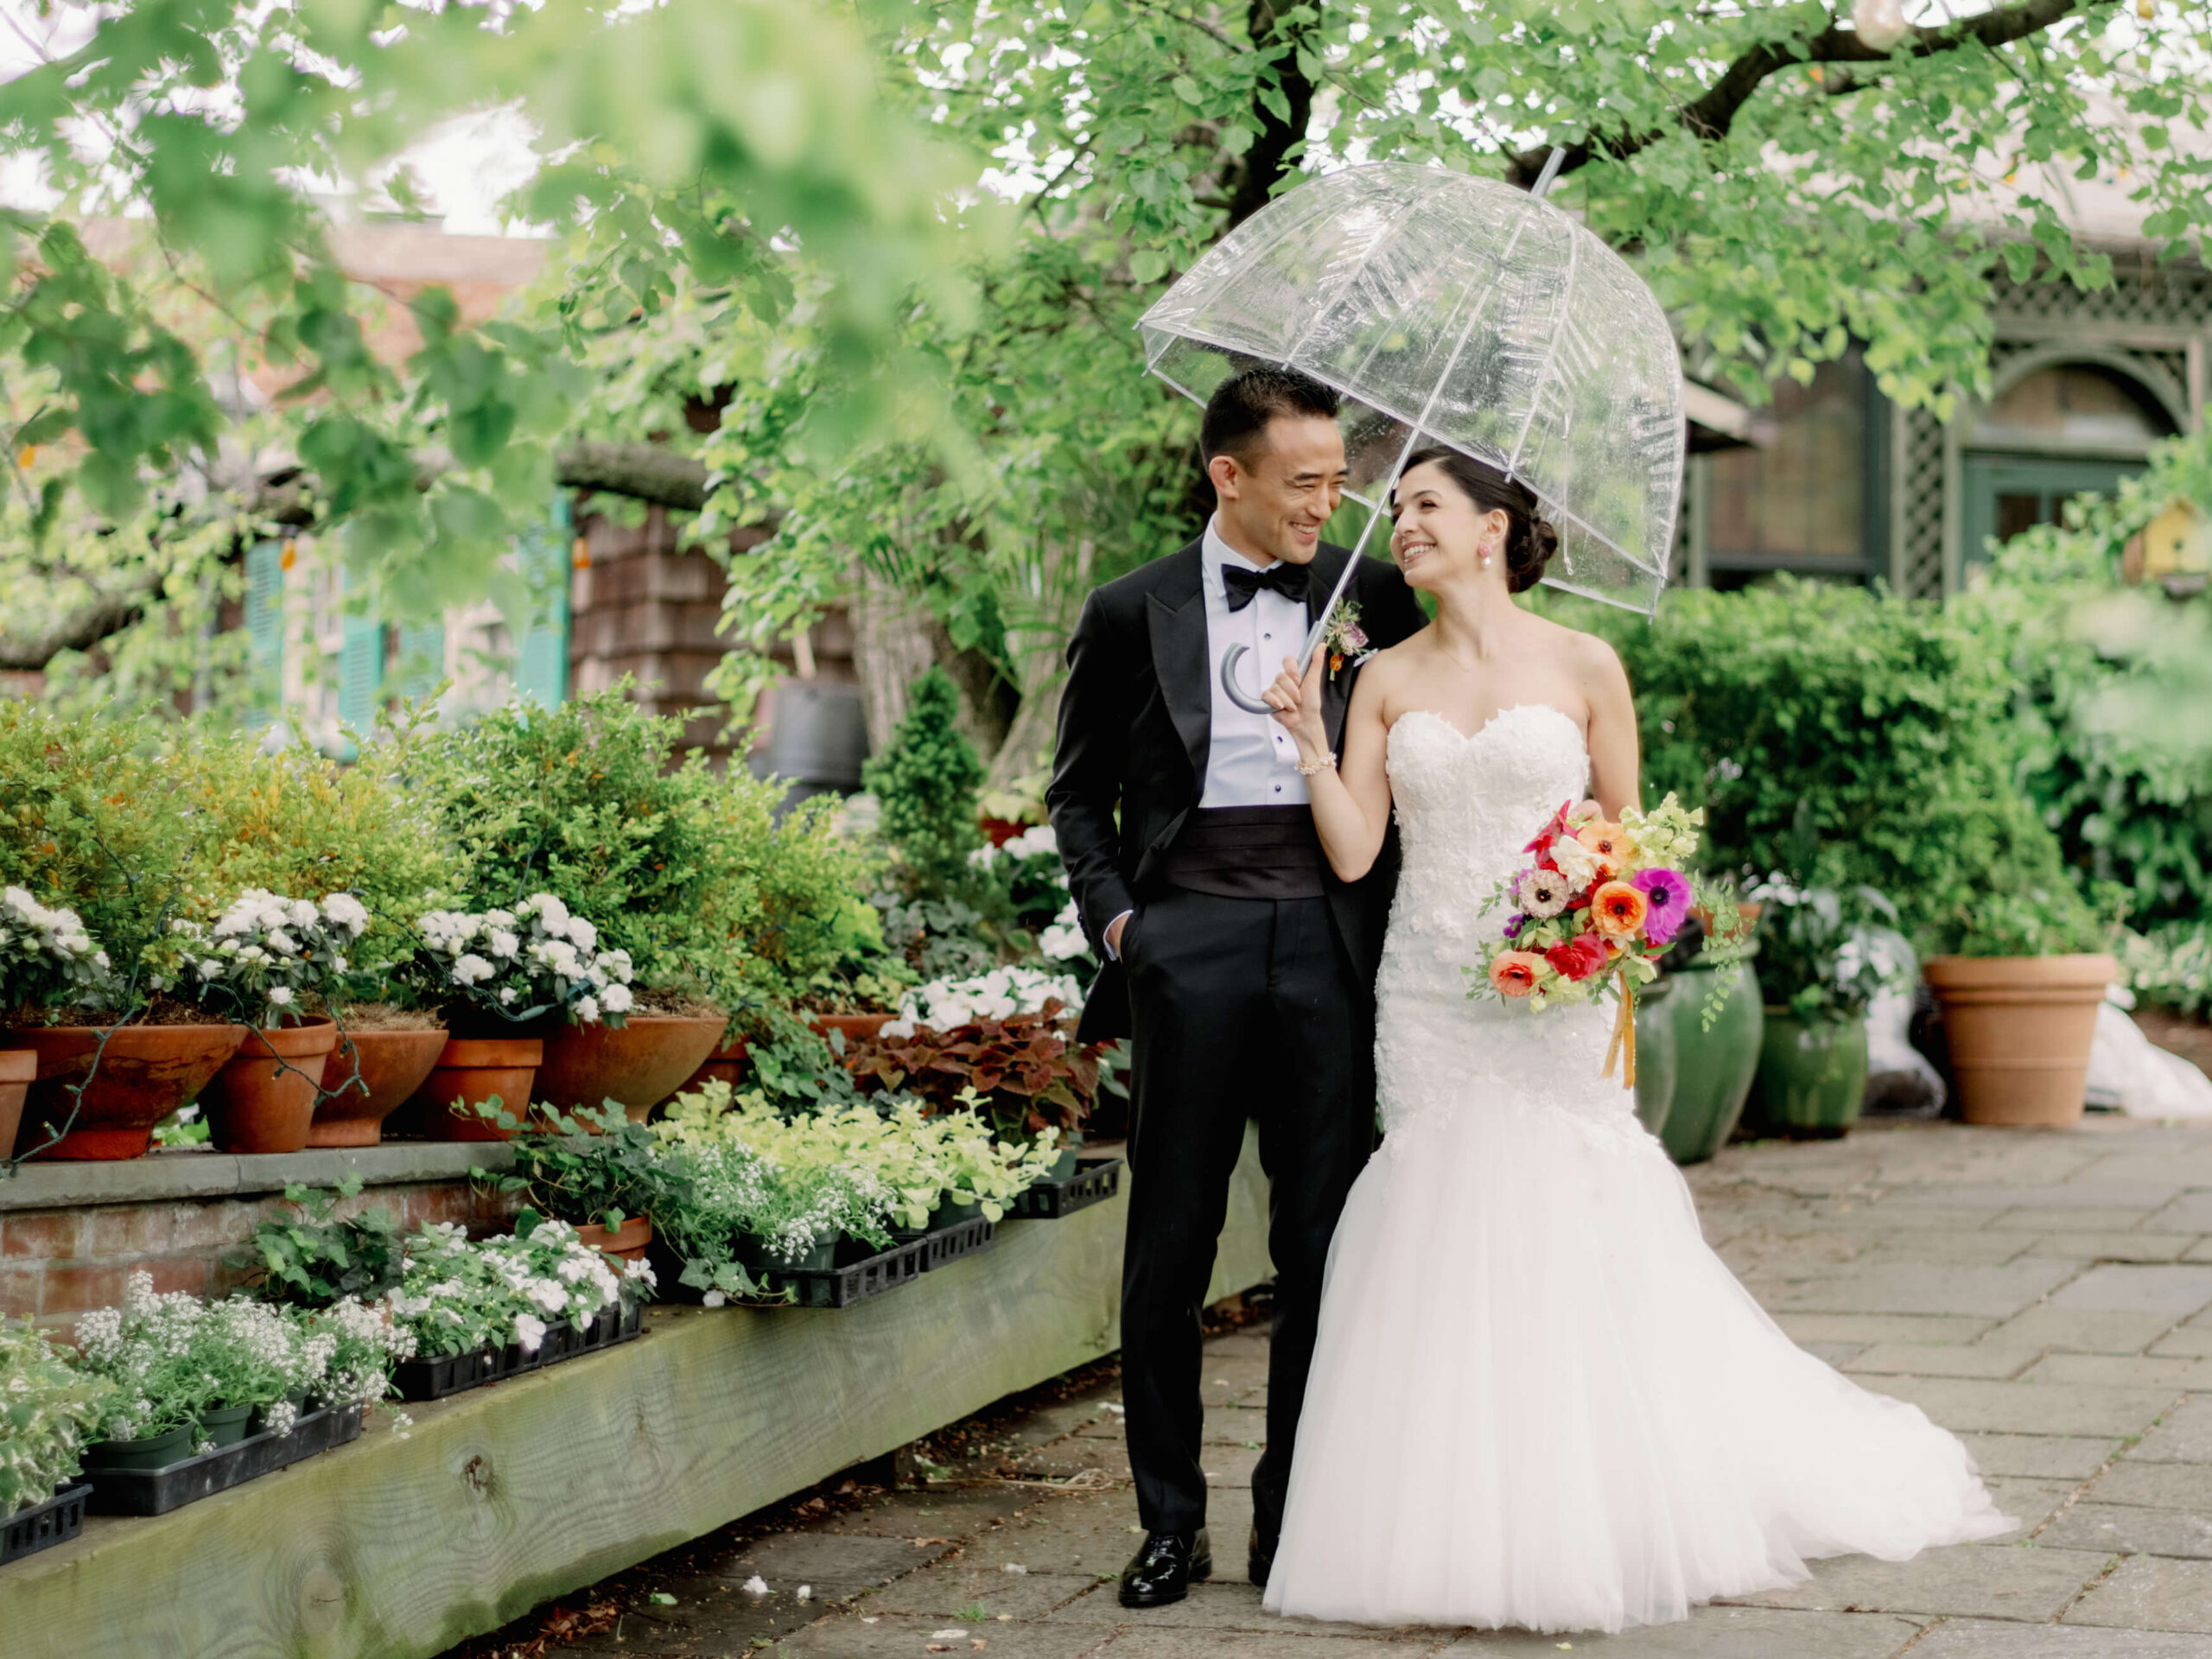 The bride and groom are walking outdoors under a clear umbrella. Image by Jenny Fu Studio